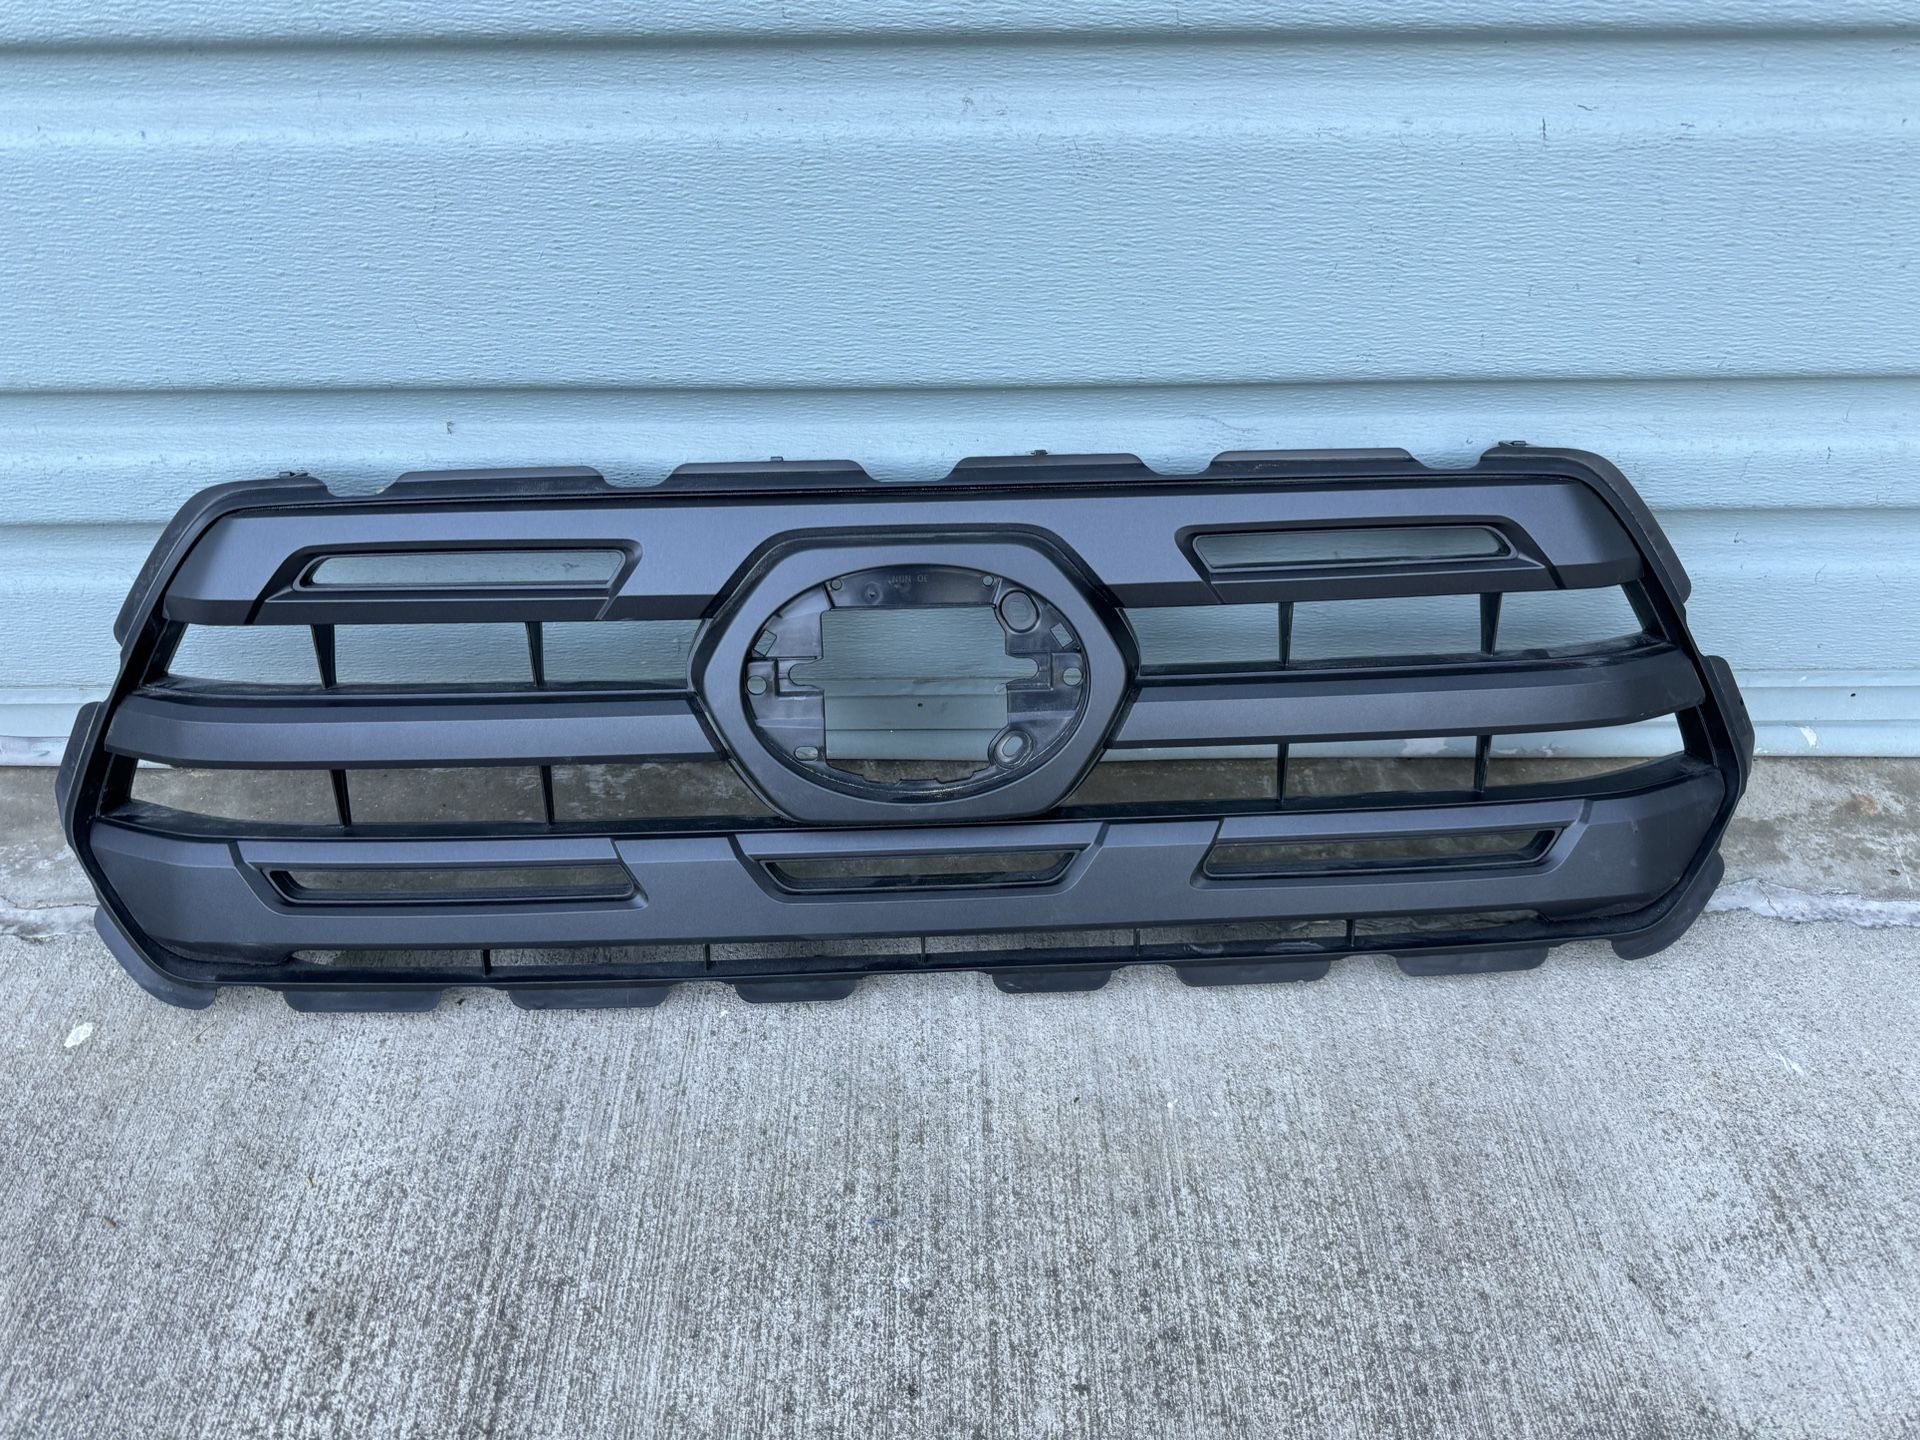 Toyota Tacoma 2016 2017 2018 2019 2020 Front Grille